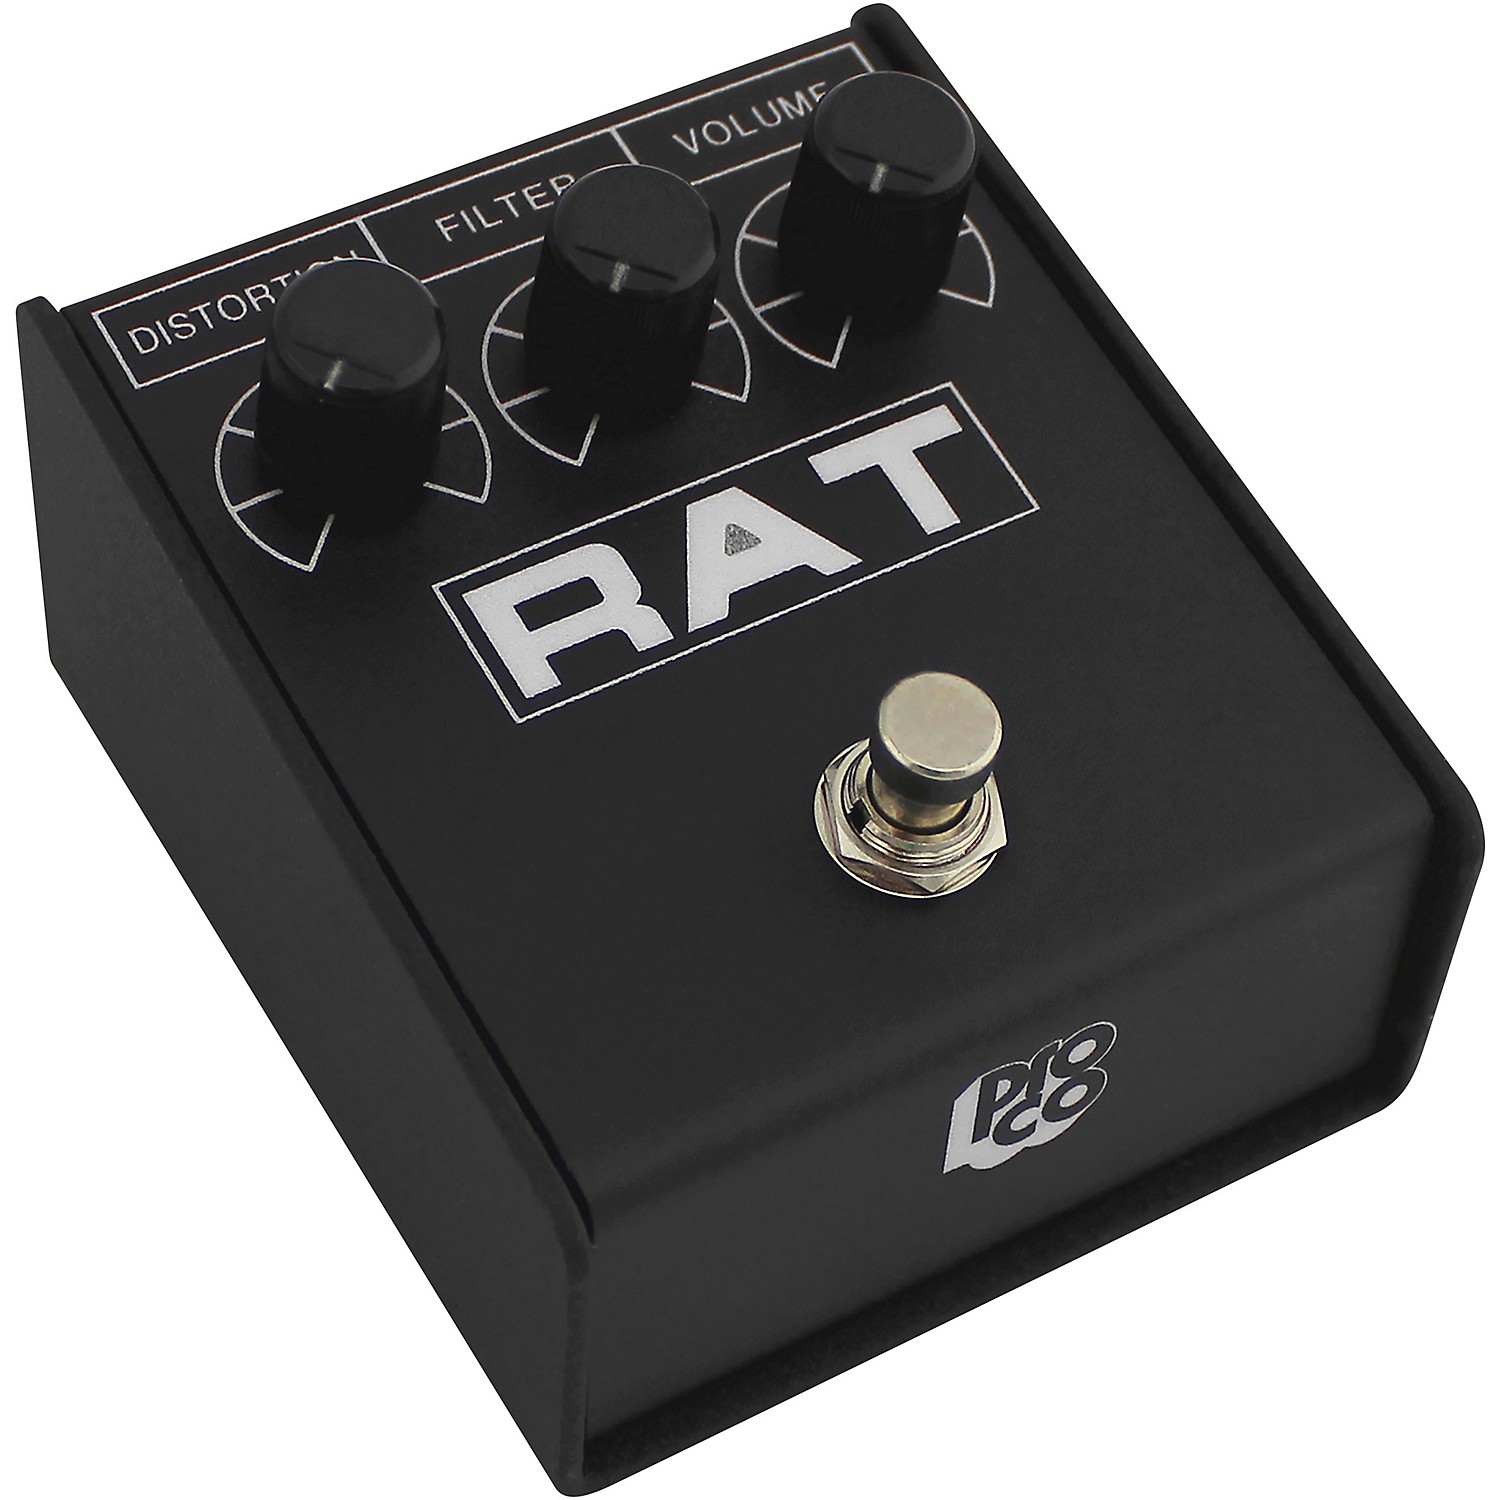 ProCo RAT2 Distortion Pedal - $55.99 in cart